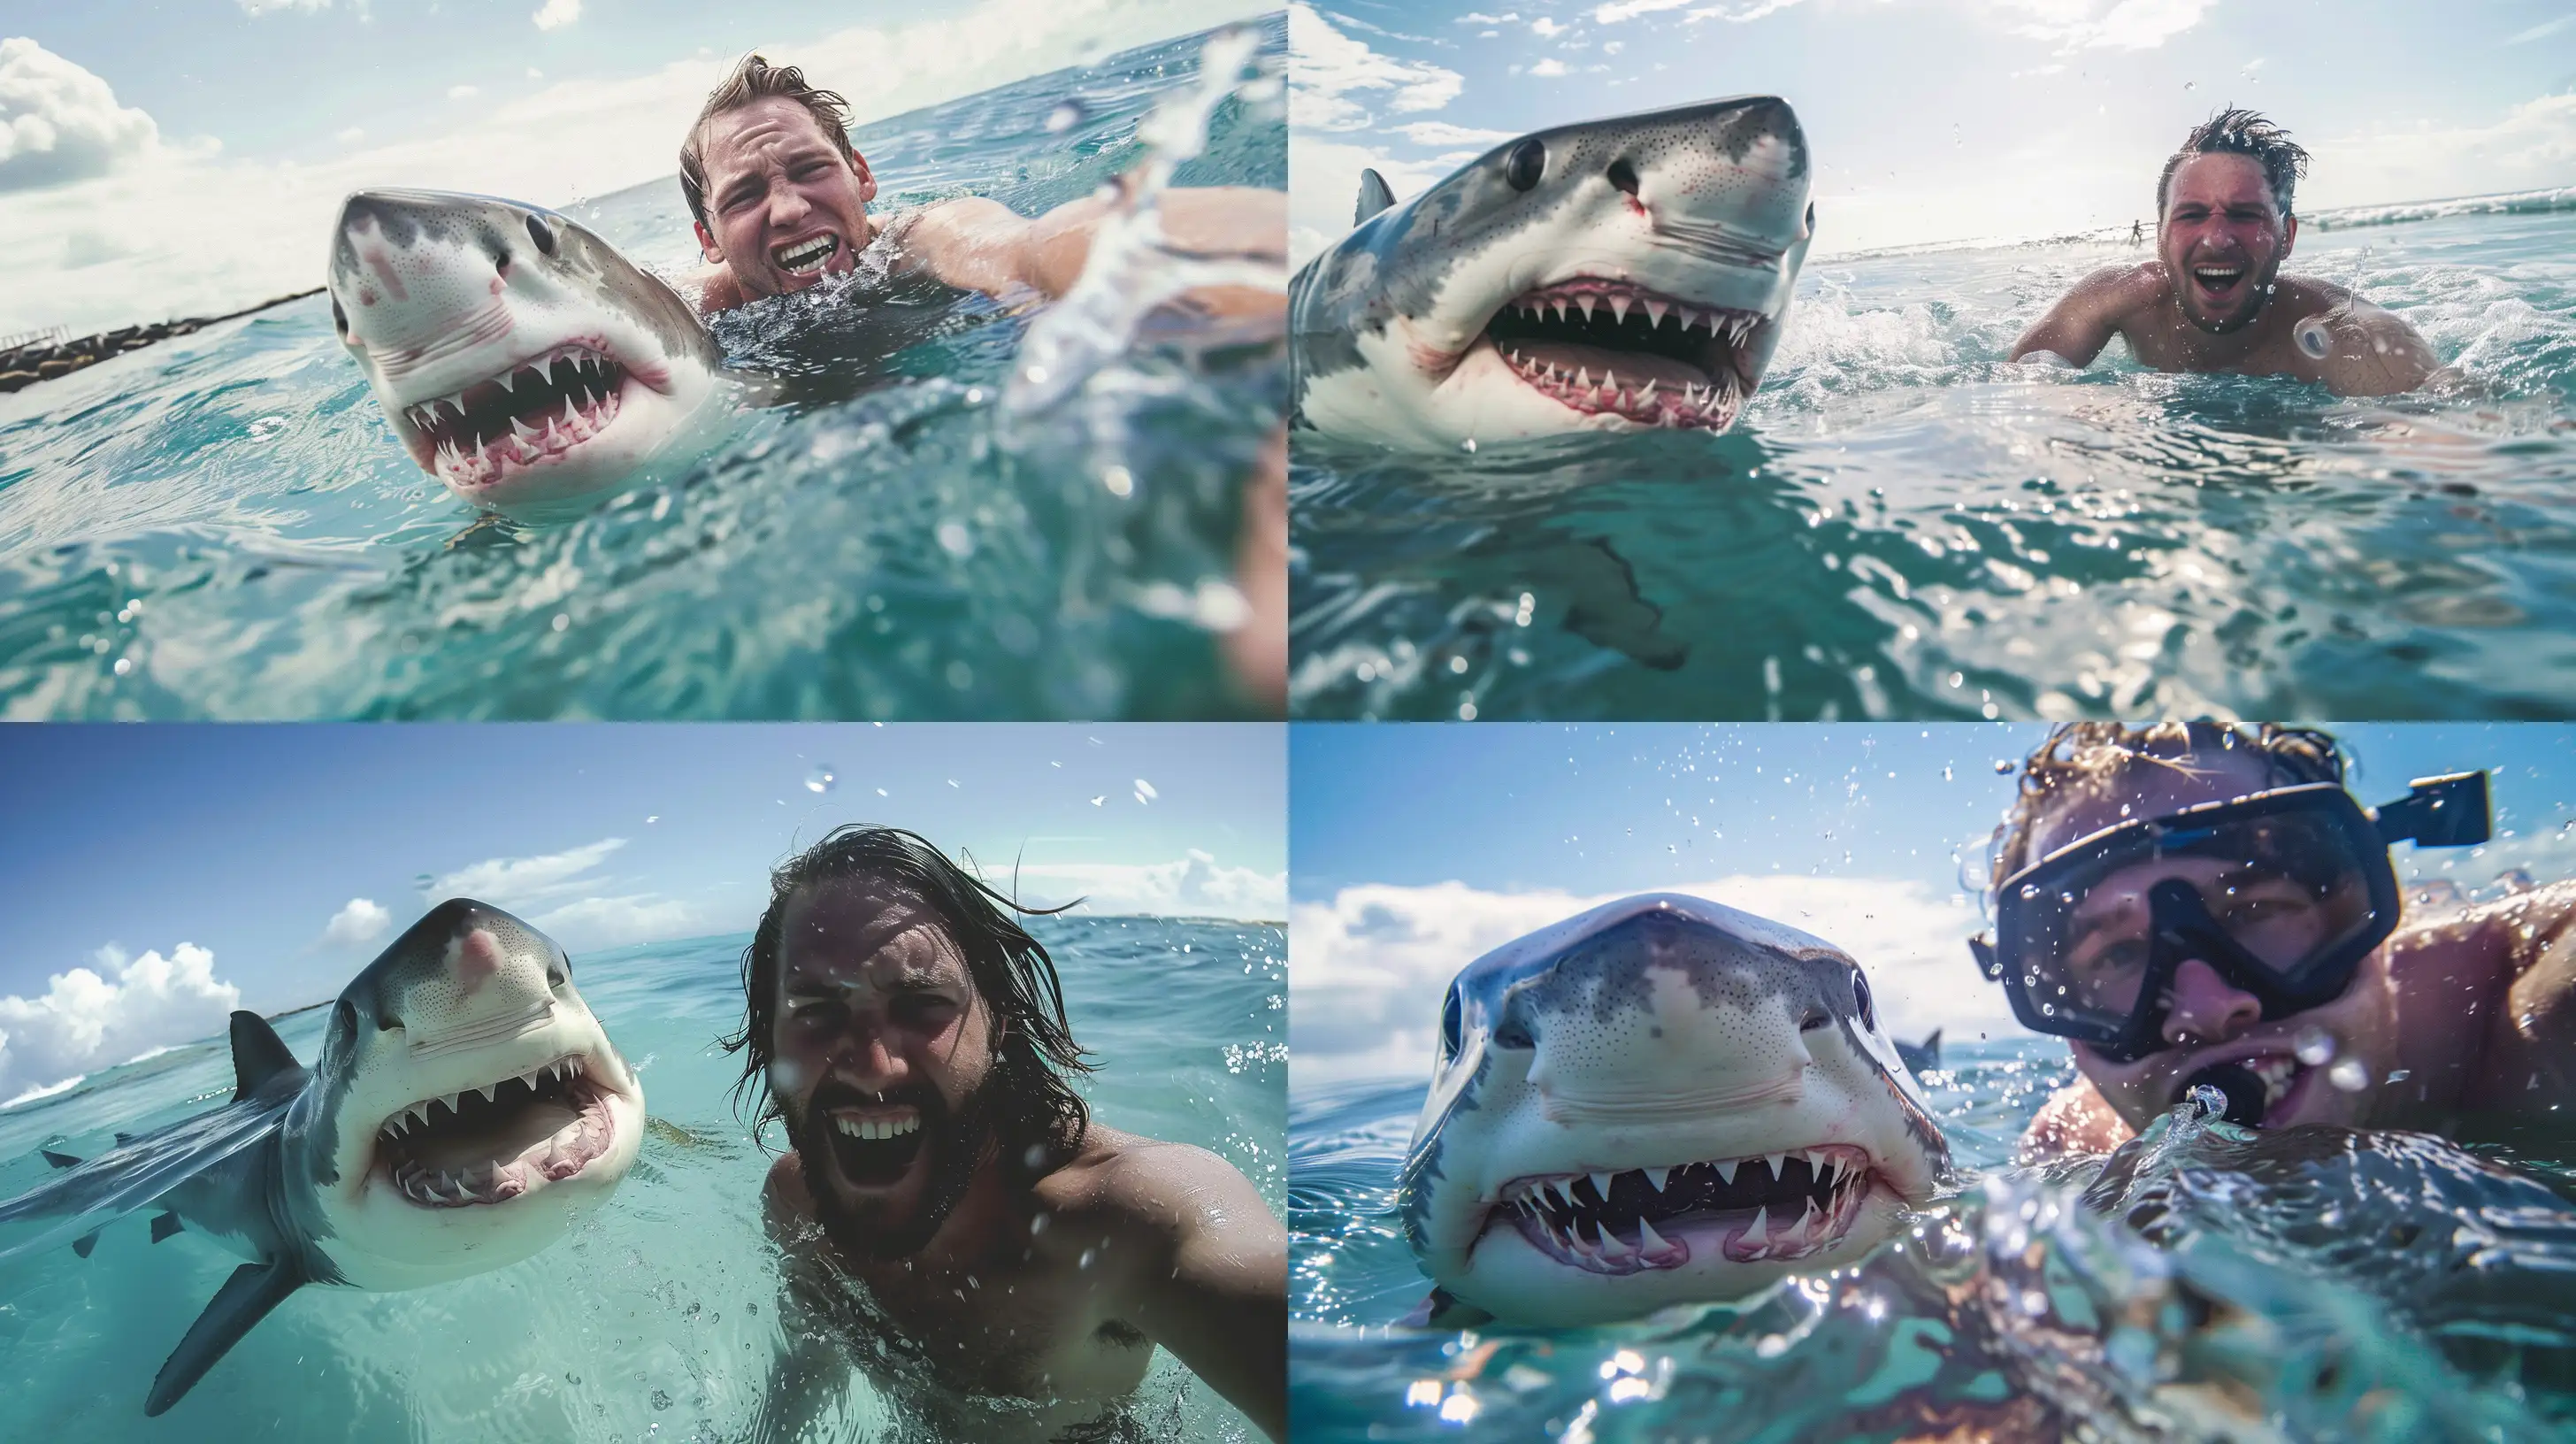 Man-Taking-Selfie-on-Beach-Attacked-by-Shark-Dynamic-National-Geographic-Style